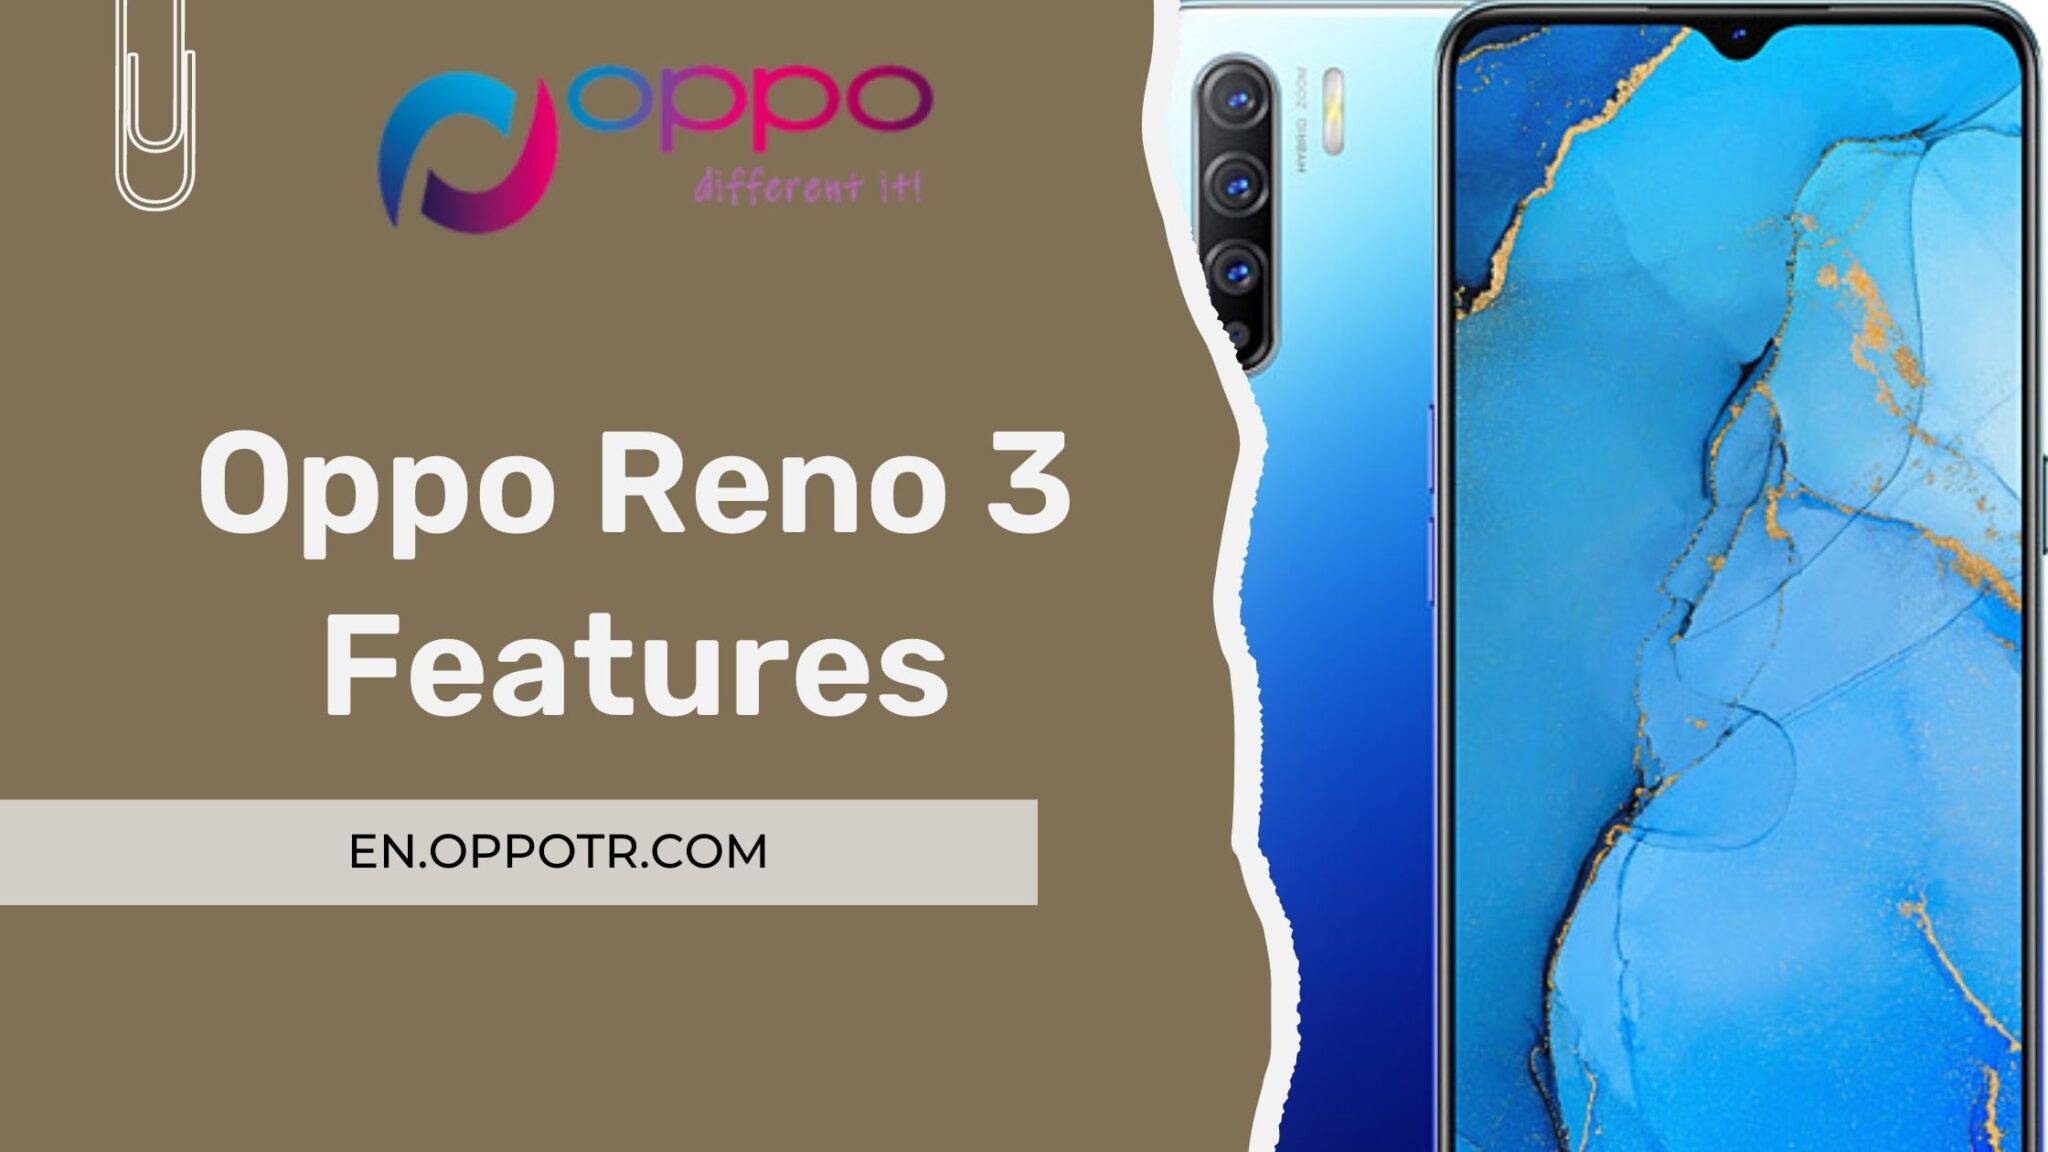 Oppo Reno 3 Features A Comprehensive Look At The Phones Features And Specifications Oppo Forum 4551